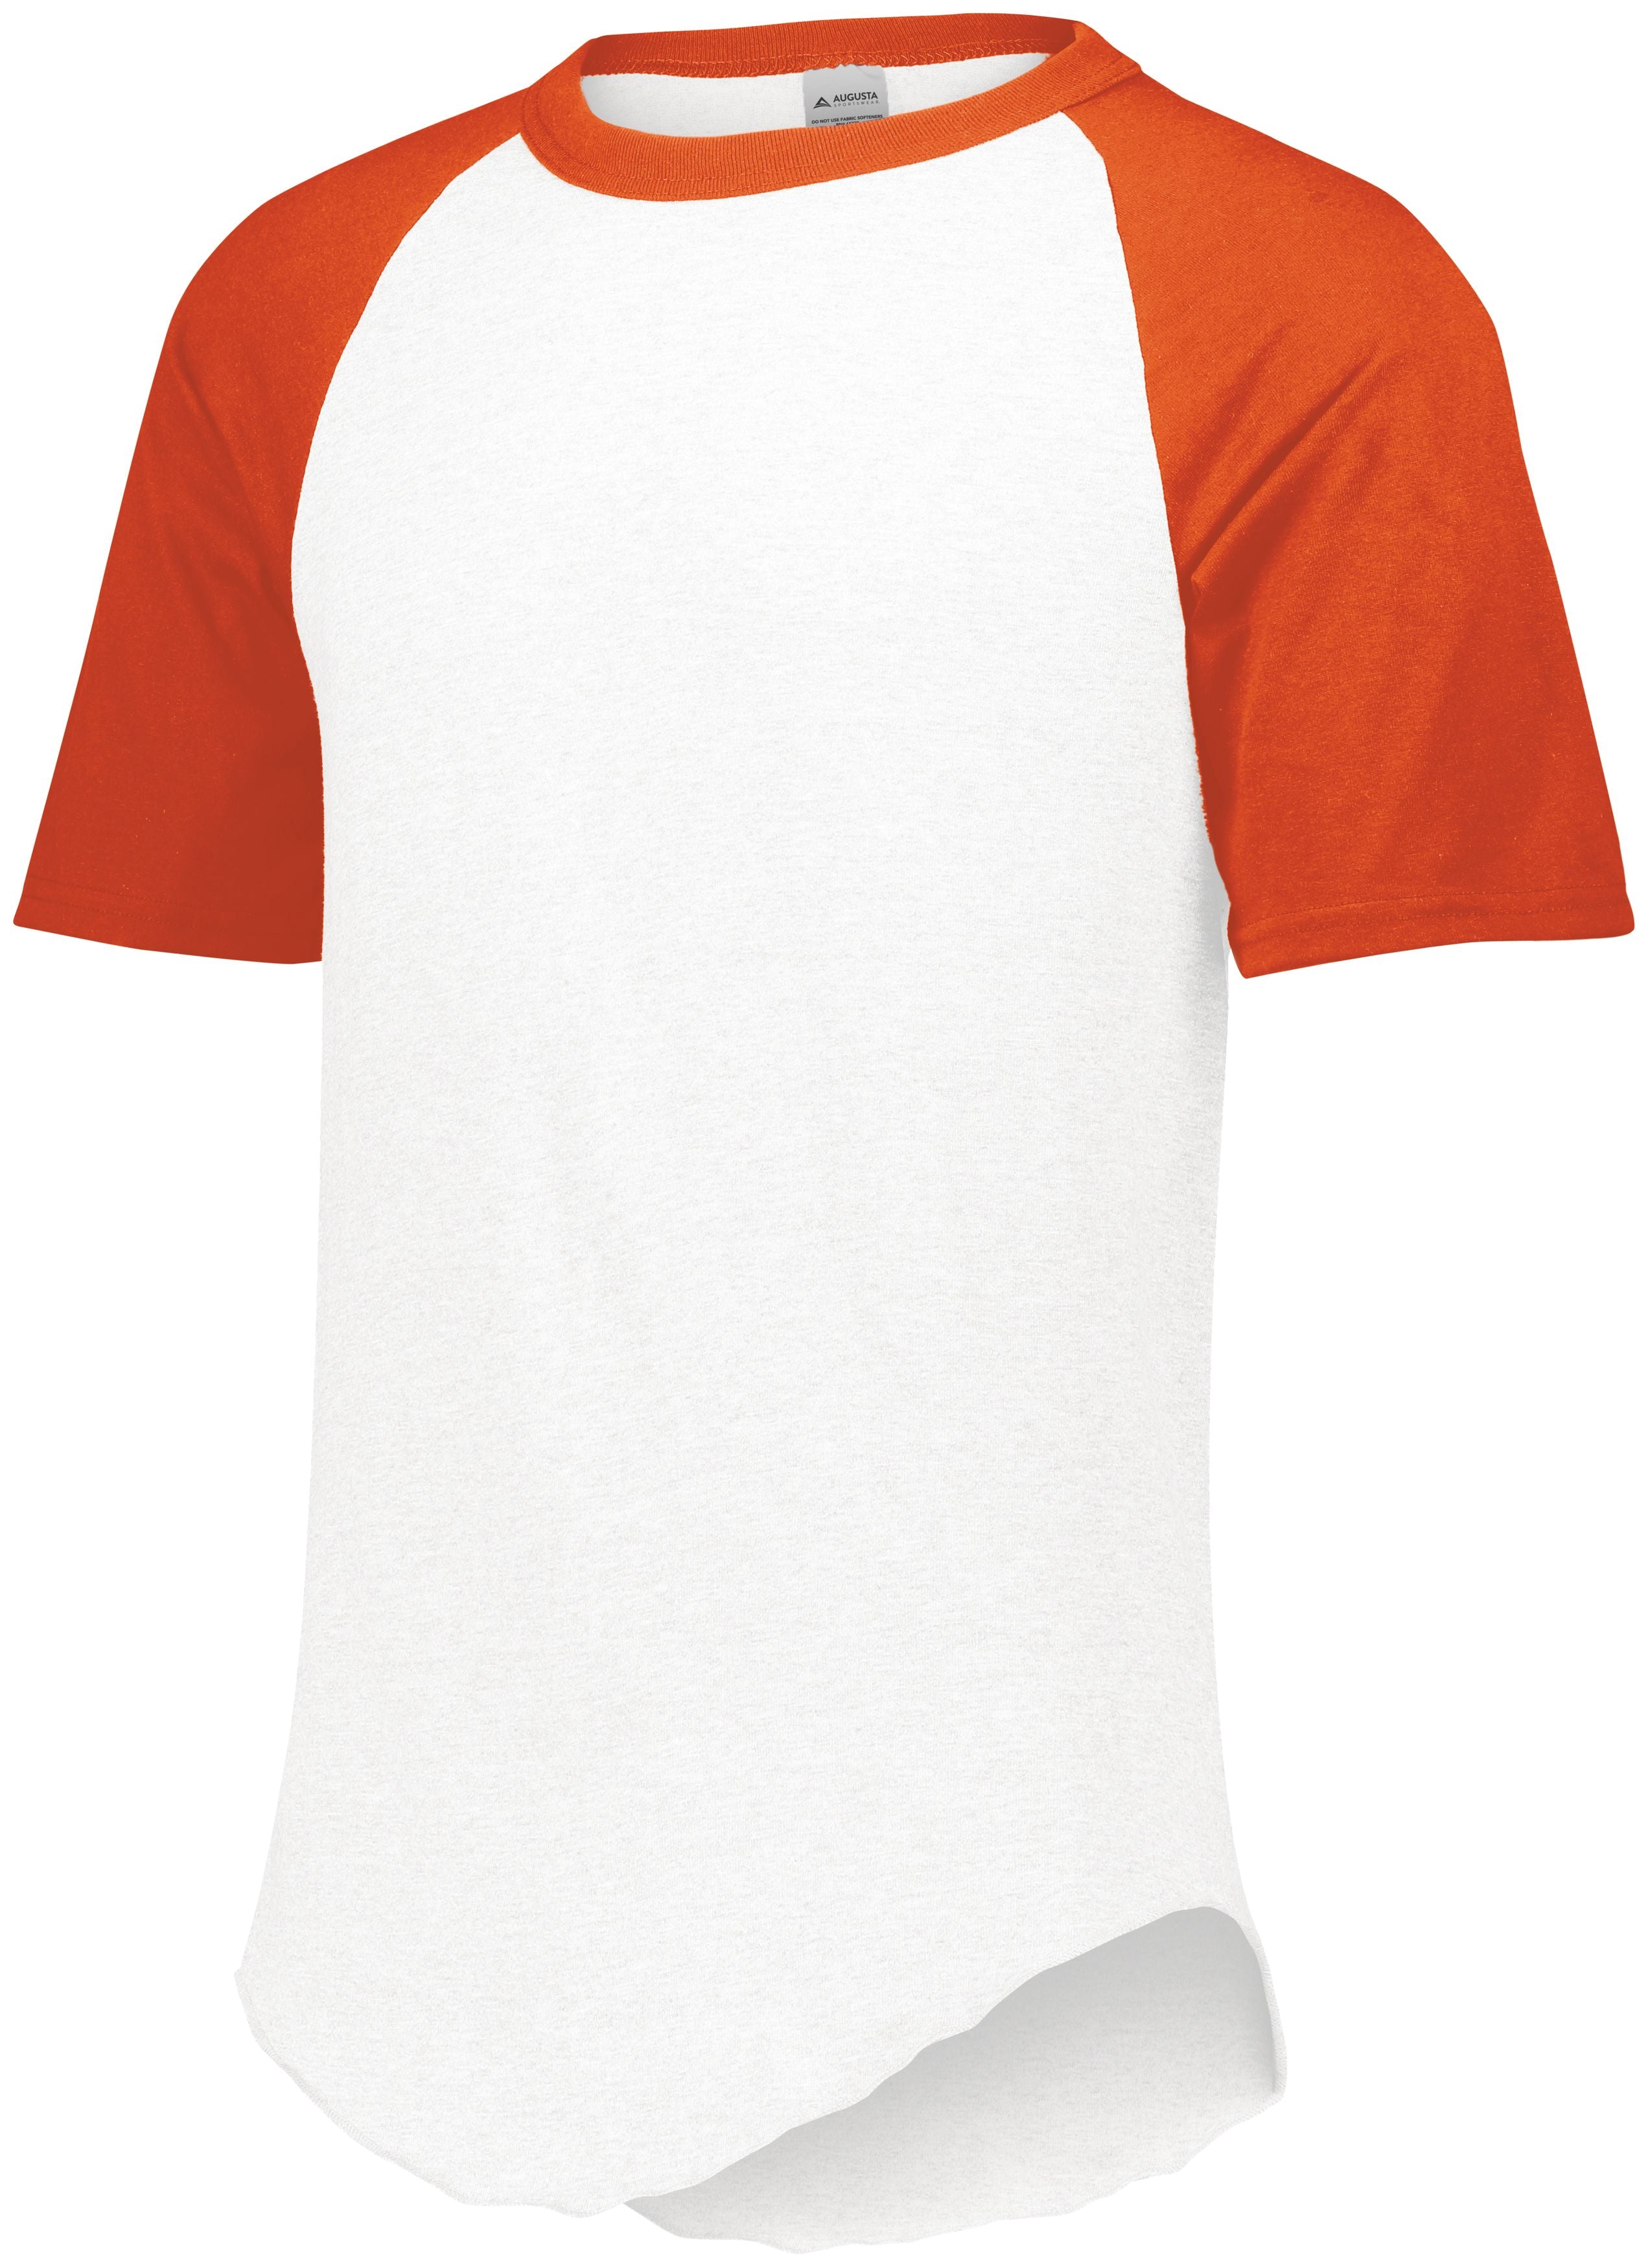 Augusta Sportswear Short Sleeve Baseball Jersey in White/Orange  -Part of the Adult, Adult-Jersey, Augusta-Products, Baseball, Shirts, All-Sports, All-Sports-1 product lines at KanaleyCreations.com